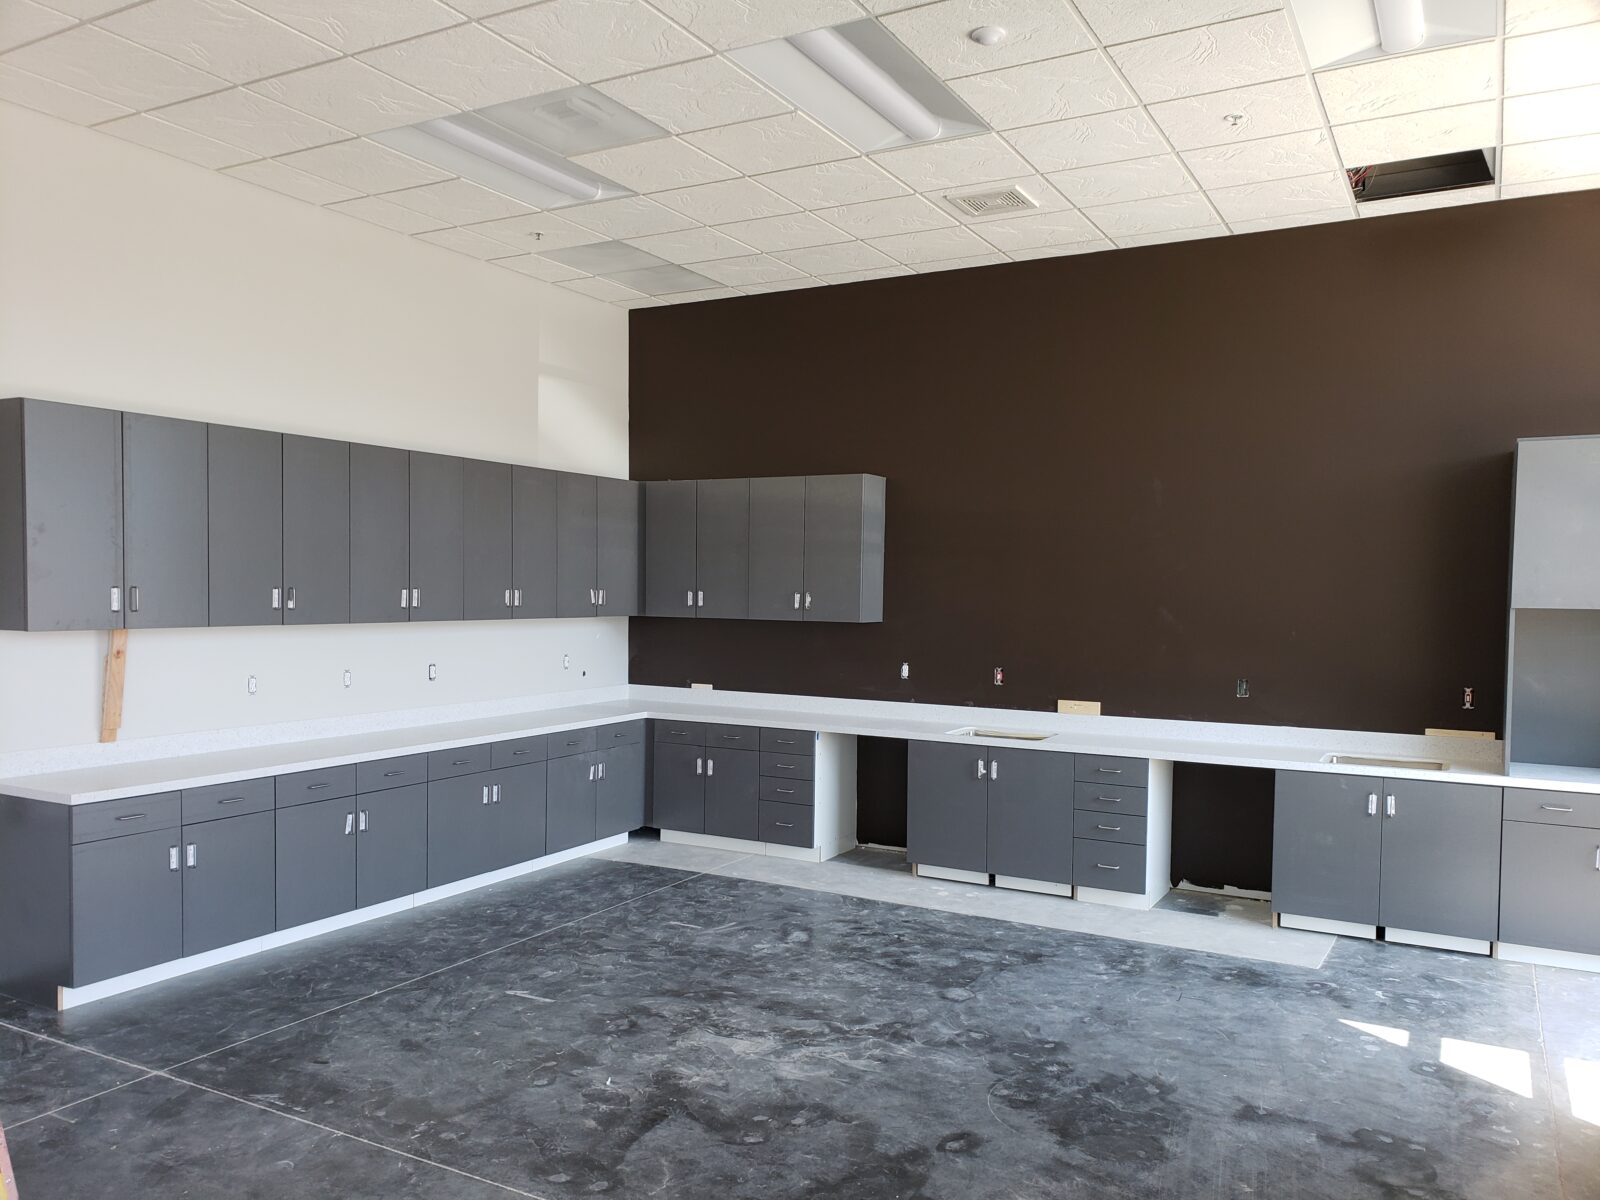 Large break room space cabinets. Solid surface counter top. Corean solid surface.